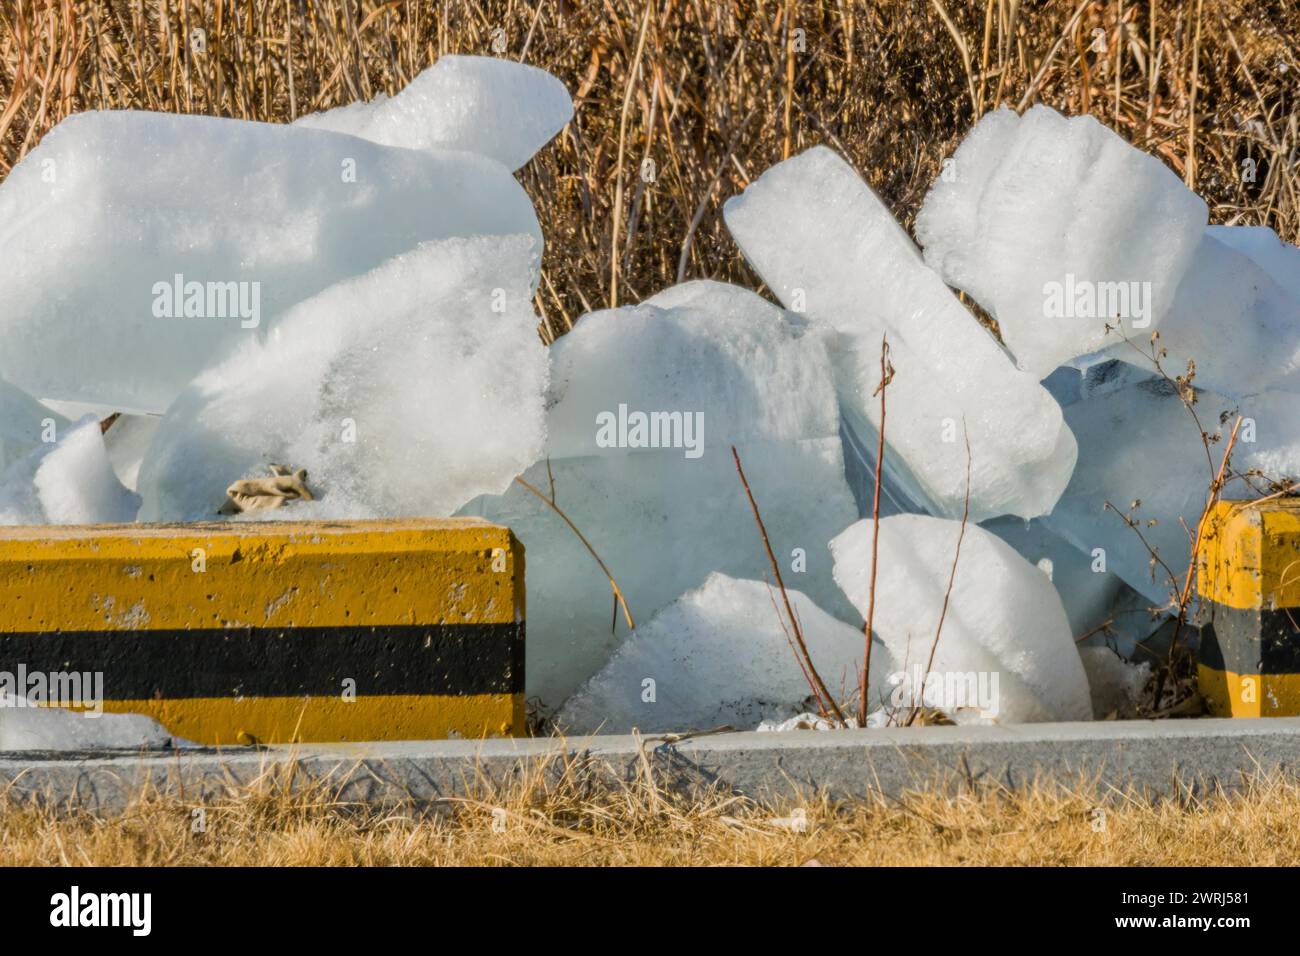 Large blocks of ice laying on ground next to parking lot with tall brown reeds in background in Daejeon, South Korea Stock Photo